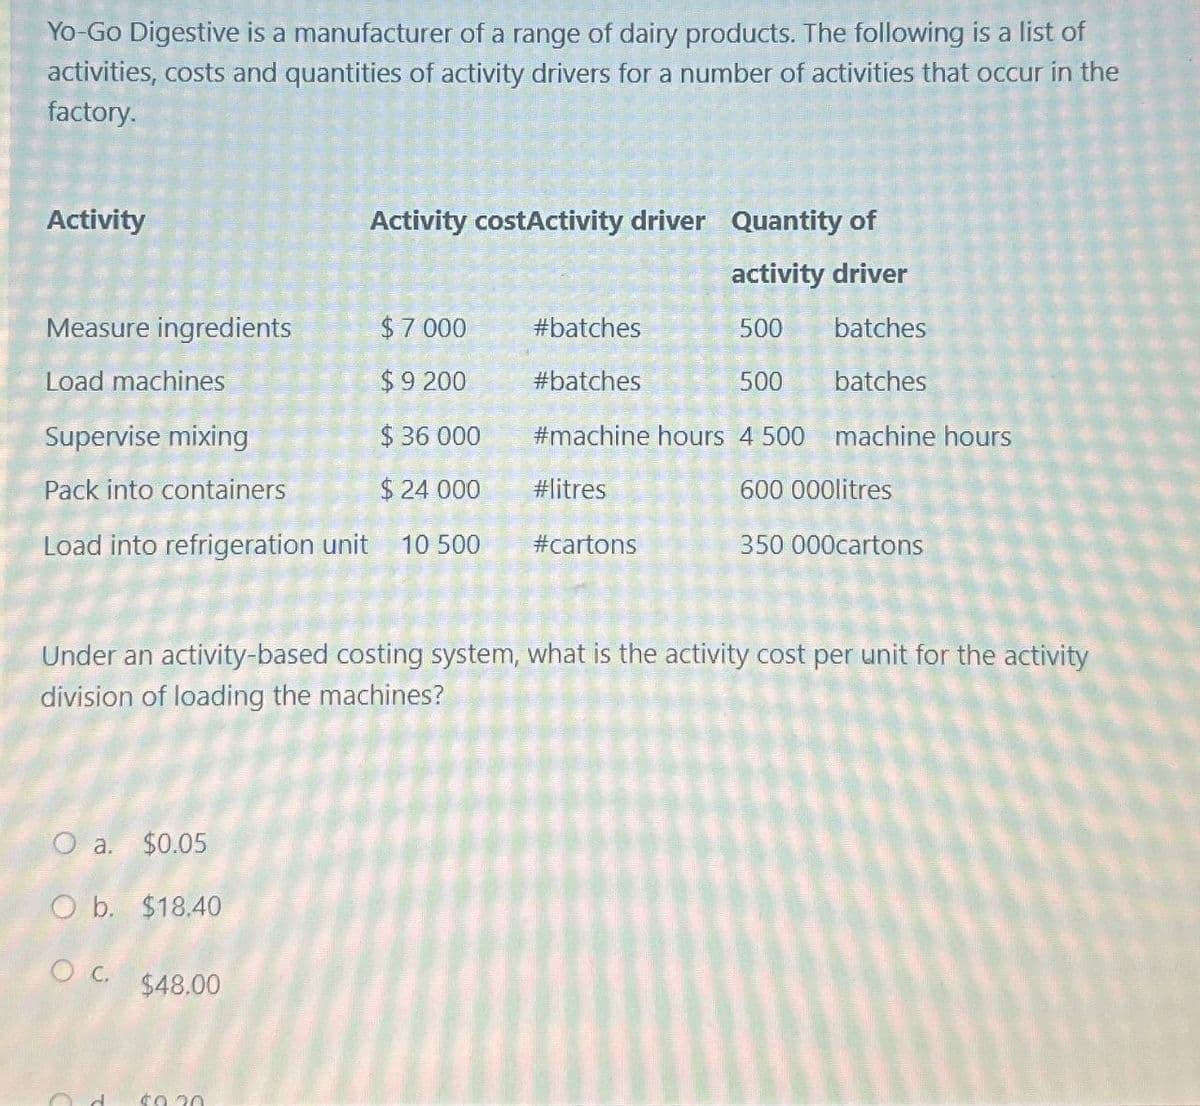 Yo-Go Digestive is a manufacturer of a range of dairy products. The following is a list of
activities, costs and quantities of activity drivers for a number of activities that occur in the
factory.
Activity
Activity costActivity driver Quantity of
activity driver
Measure ingredients
Load machines
$ 7.000
$9 200
#batches
500
batches
#batches
500 batches
Supervise mixing
$ 36 000
#machine hours 4 500 machine hours
Pack into containers
$ 24 000
#litres
600 000litres
Load into refrigeration unit
10 500
#cartons
350 000cartons
Under an activity-based costing system, what is the activity cost per unit for the activity
division of loading the machines?
O a. $0.05
O b. $18.40
○ C. $48.00
d
$0.20